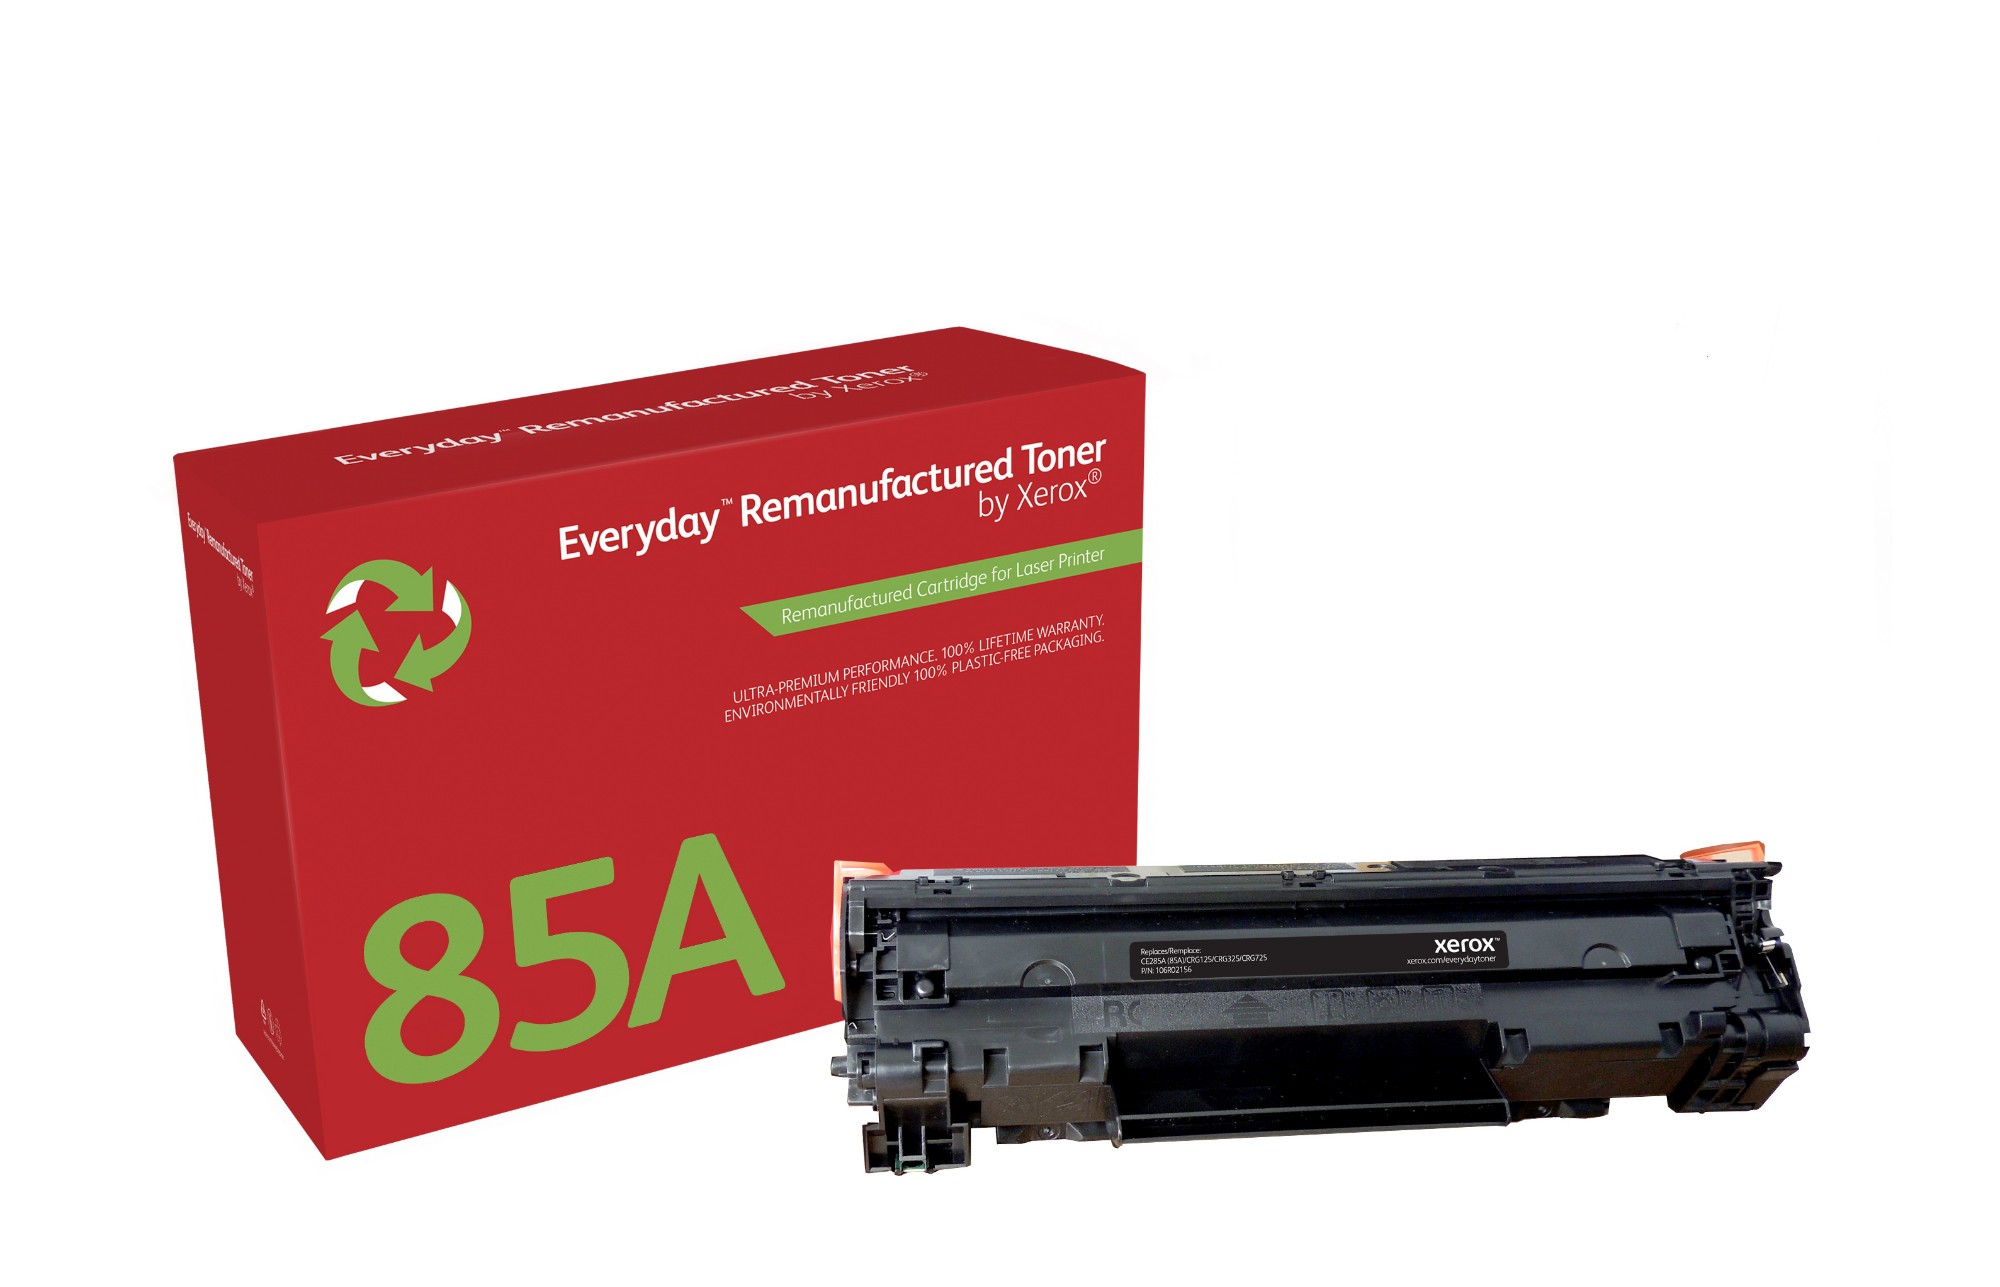 Xerox 106R02156 Toner cartridge black, 1.6K pages/5% (replaces HP 85A/CE285A) for HP Pro P 1100